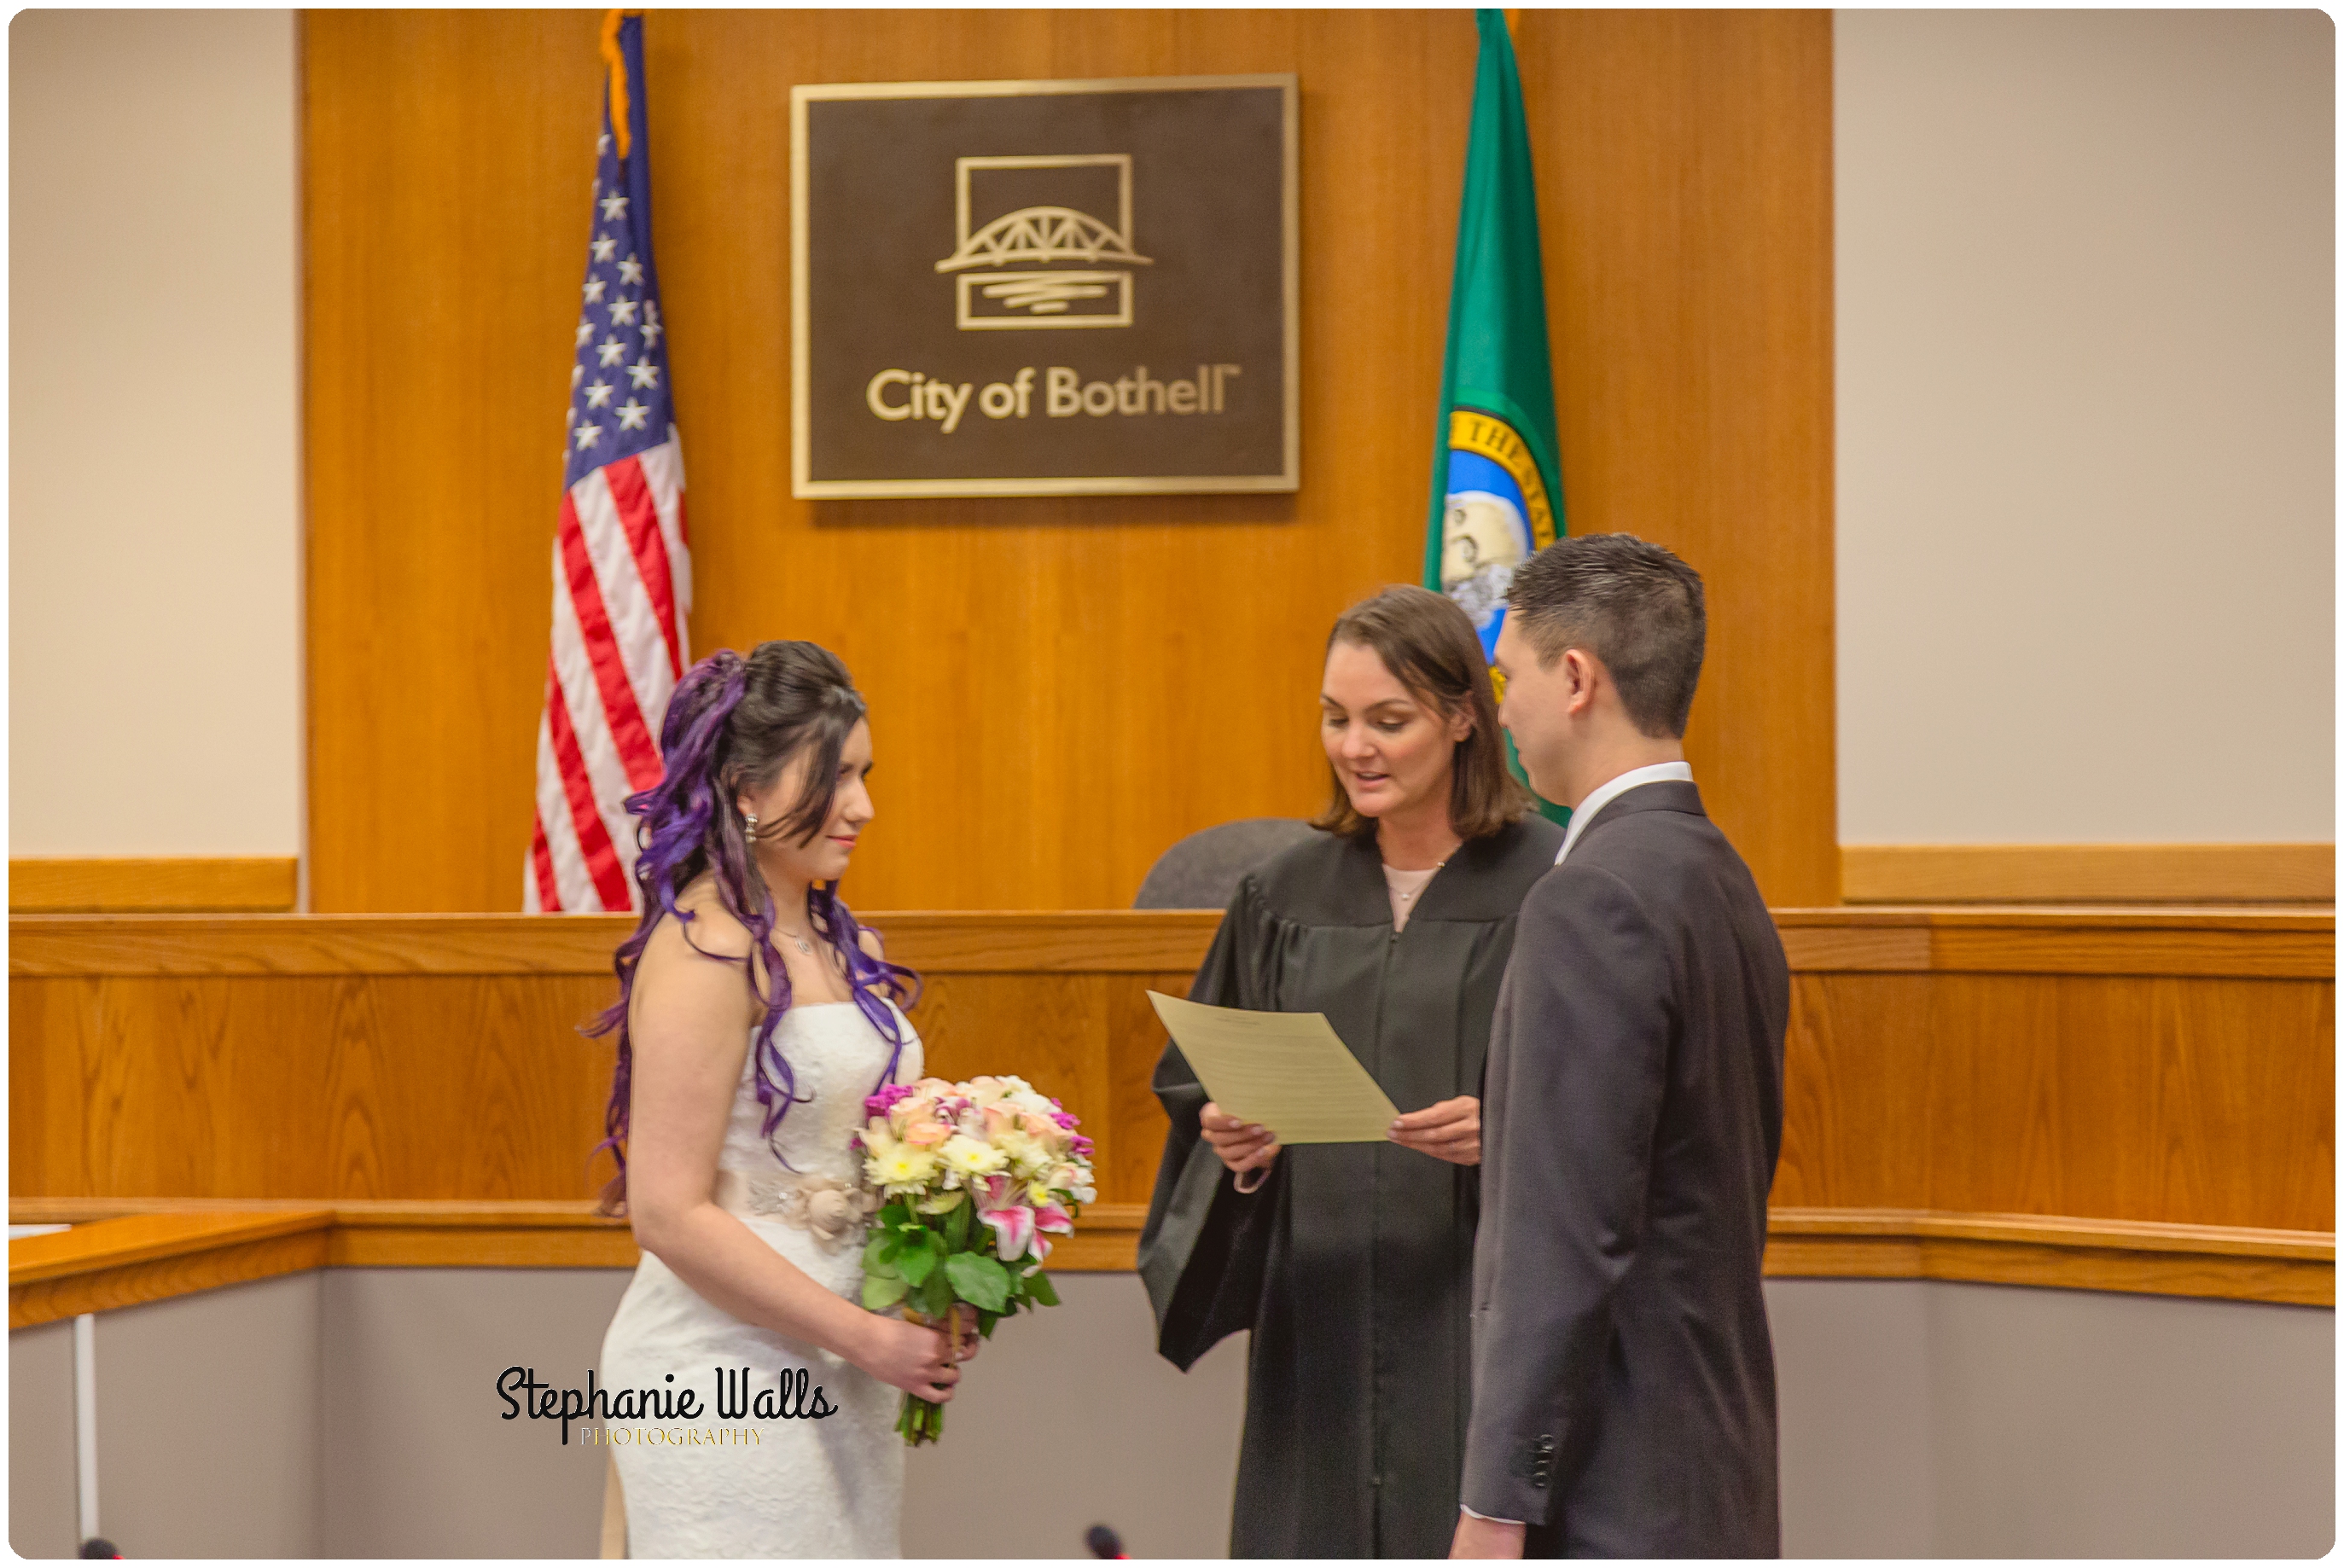 Chan Wedding 045 LAUGHTER AND LACE | BOTHELL COURTHOUSE WEDDING BOTHELL WA